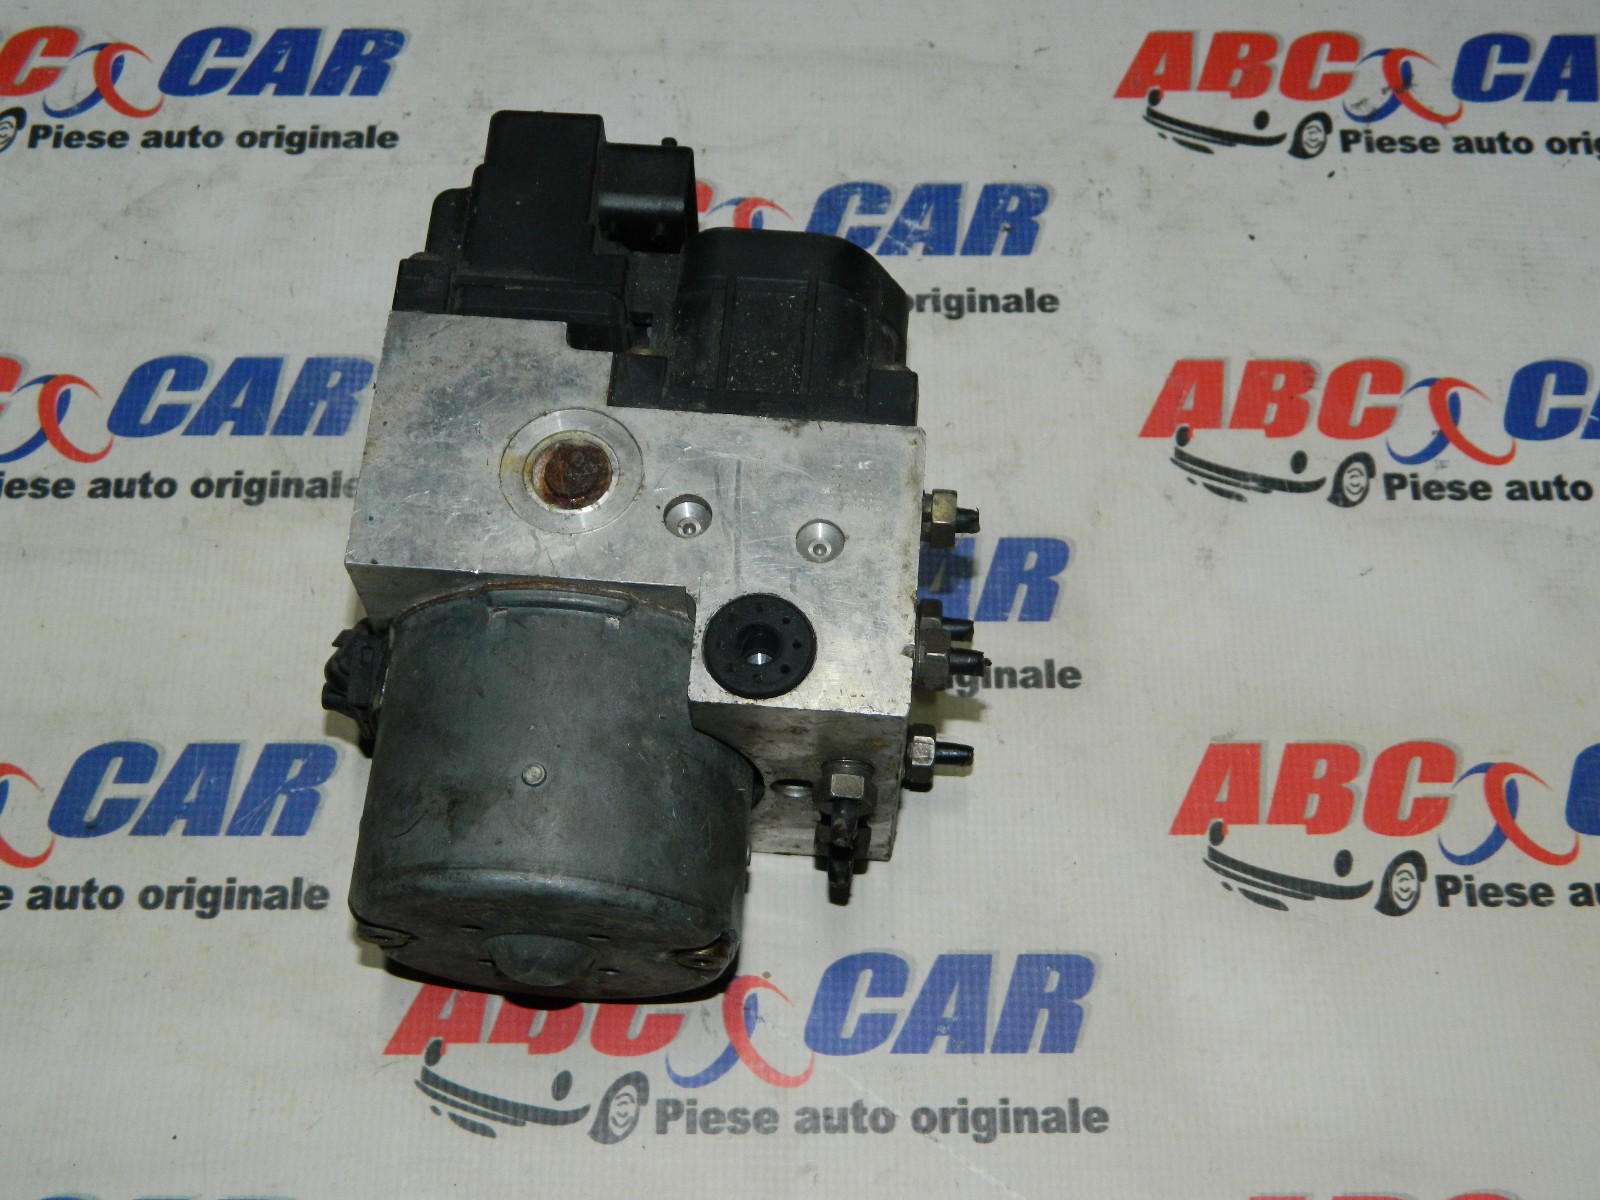 Pompa ABS Peugeot 307 20012008 Cod 9643777980 Piese